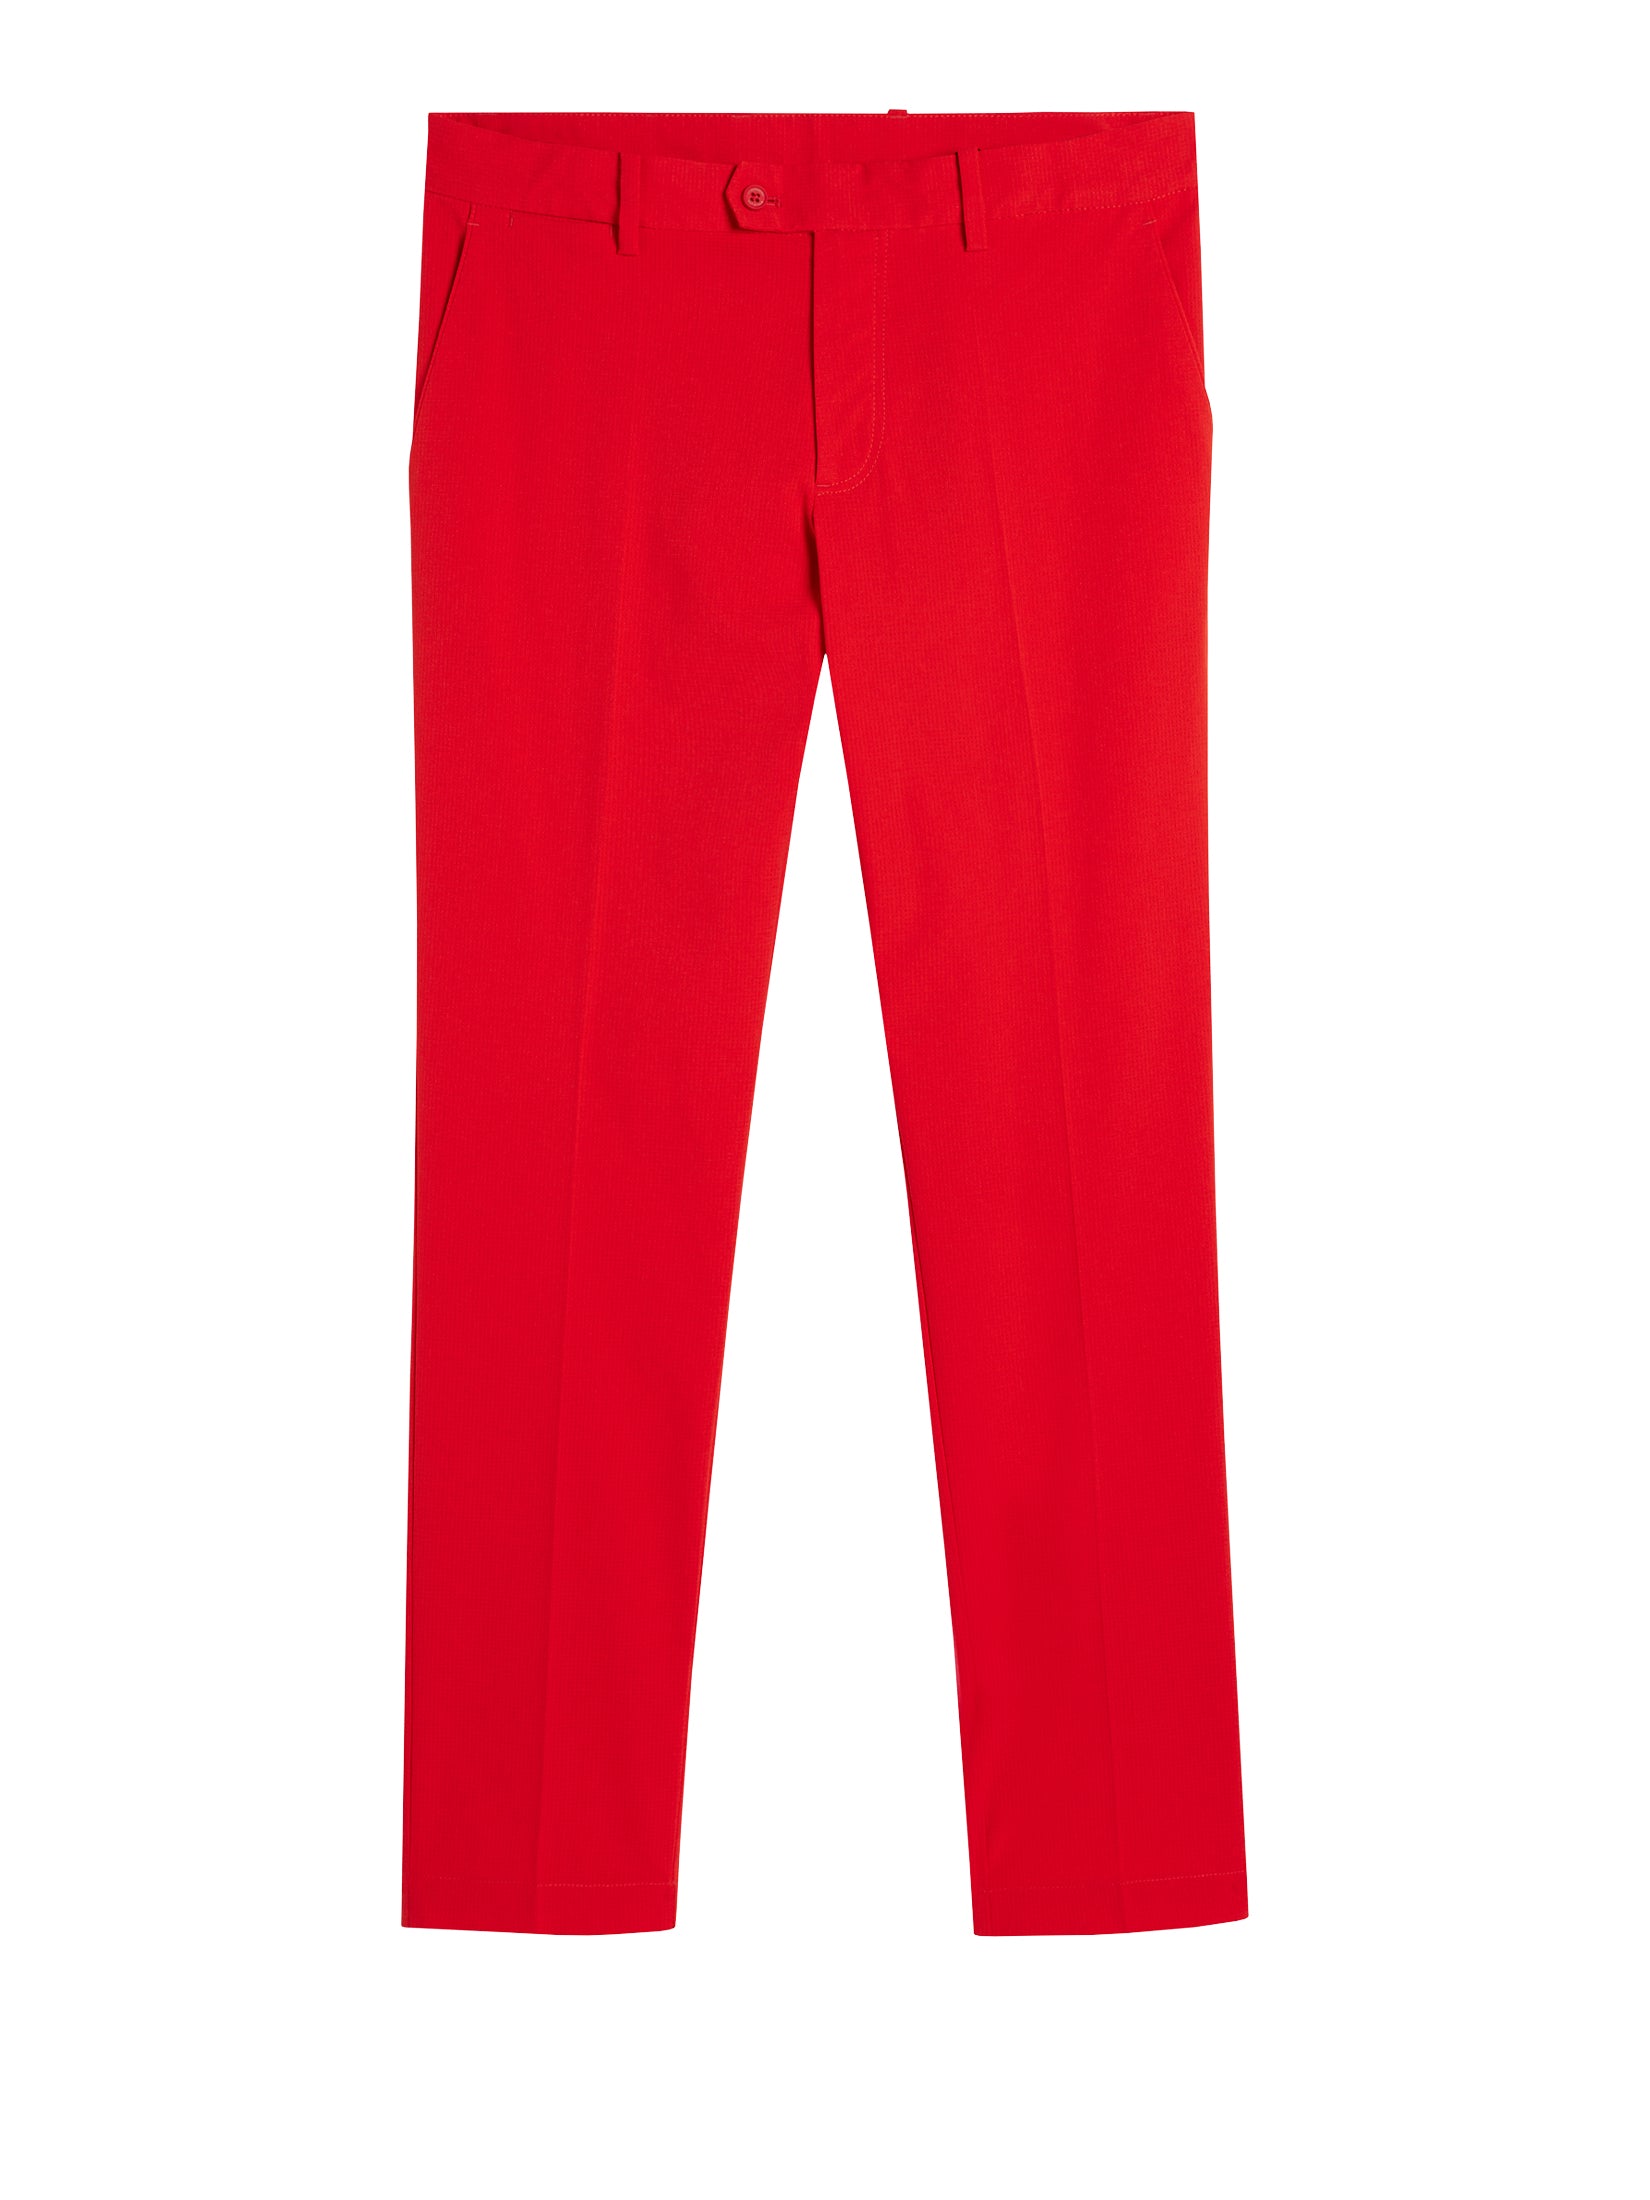 Lobster Bo Mens Golf Trousers  Choice of Colours  Just Golf Online